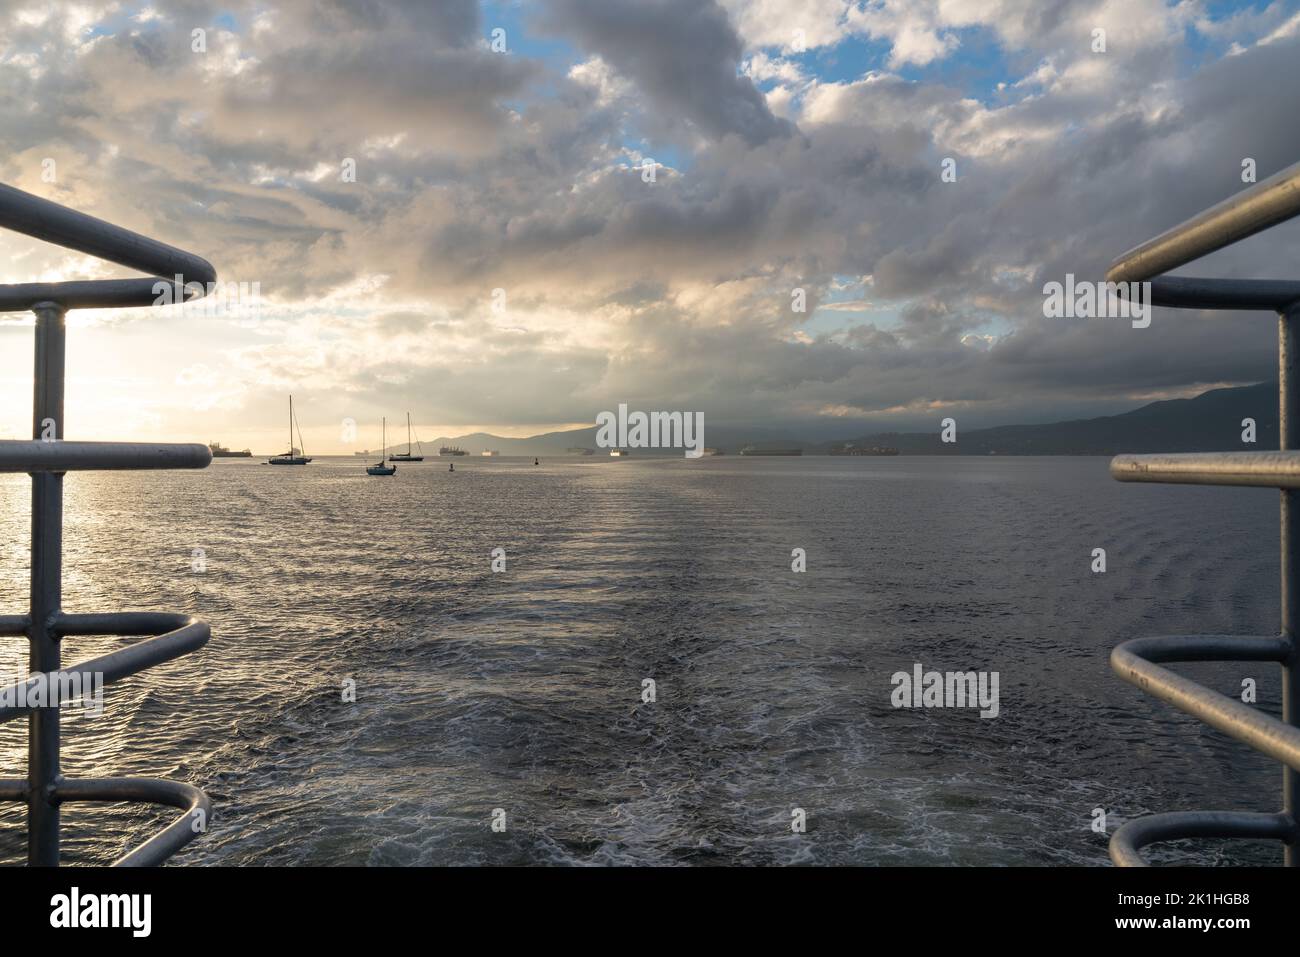 View from the taffrail of a whale watching ship, looking out over Burrard Inlet and all of the boats and container ships waiting offshore. Stock Photo